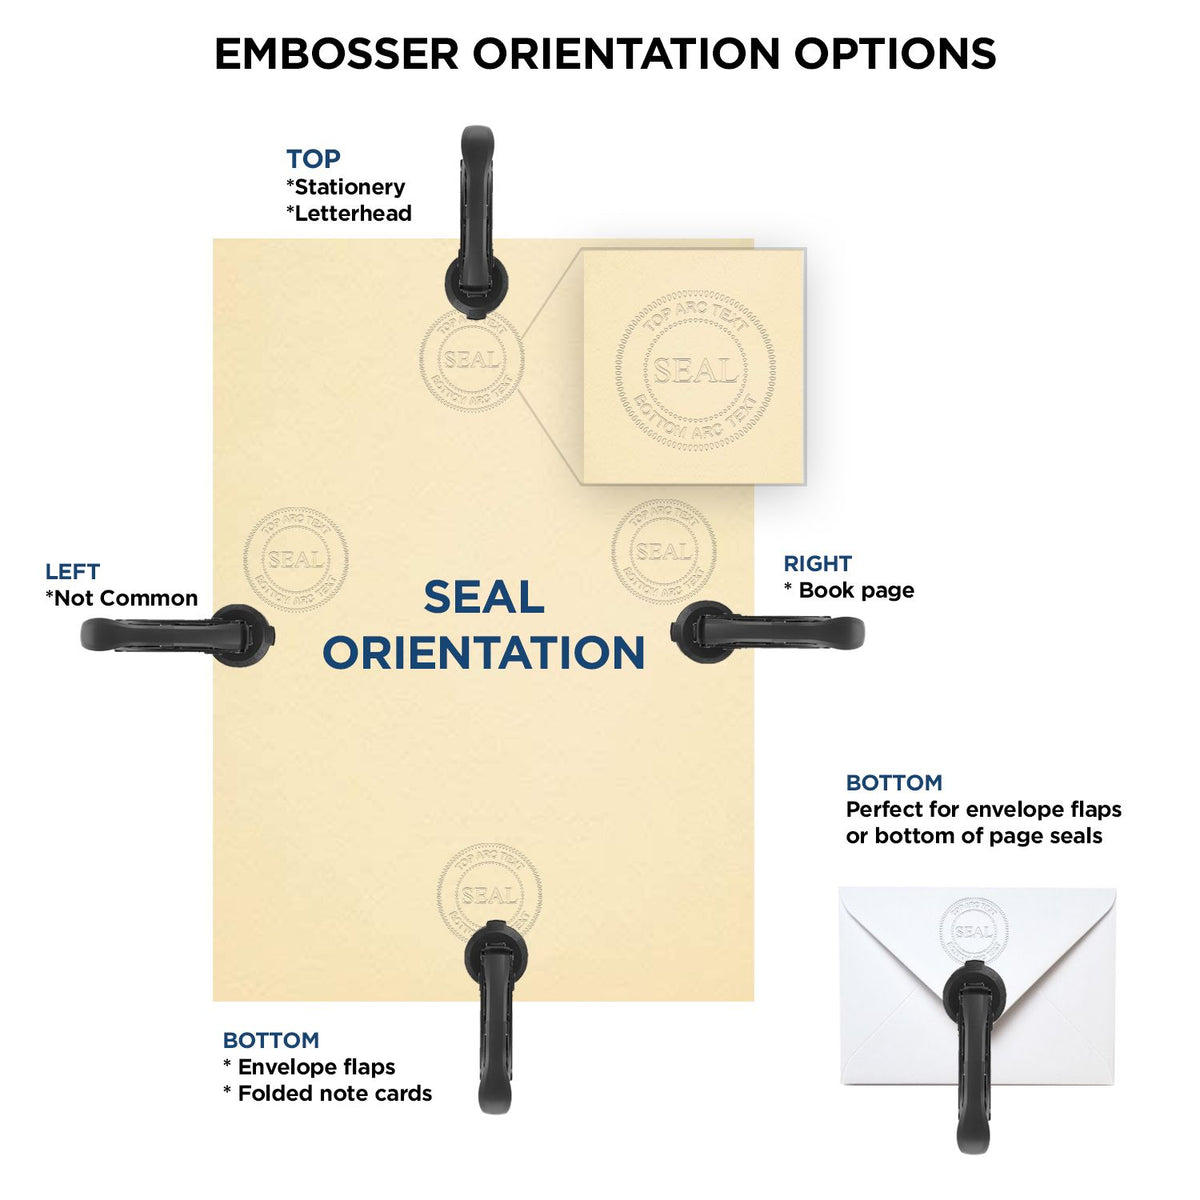 An infographic for the Hybrid New Hampshire Land Surveyor Seal showing embosser orientation, this is showing examples of a top, bottom, right and left insert.